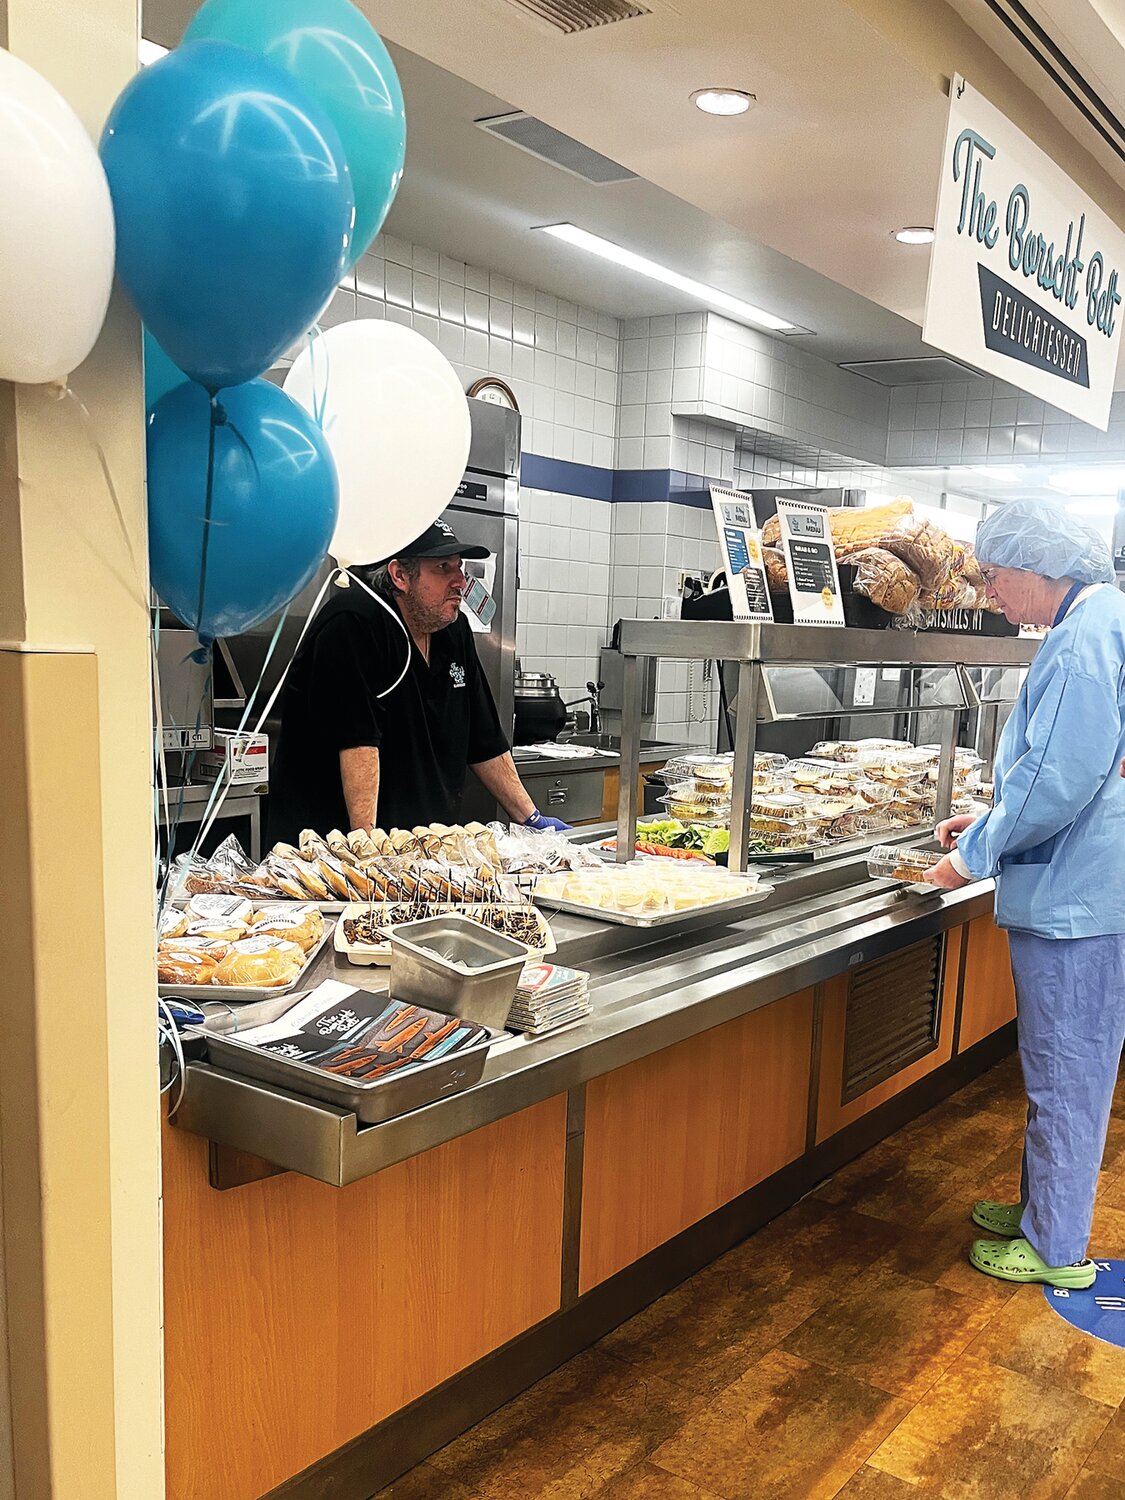 The Borscht Belt at St. Mary’s opened to patients, visitors and employees on Nov. 13.